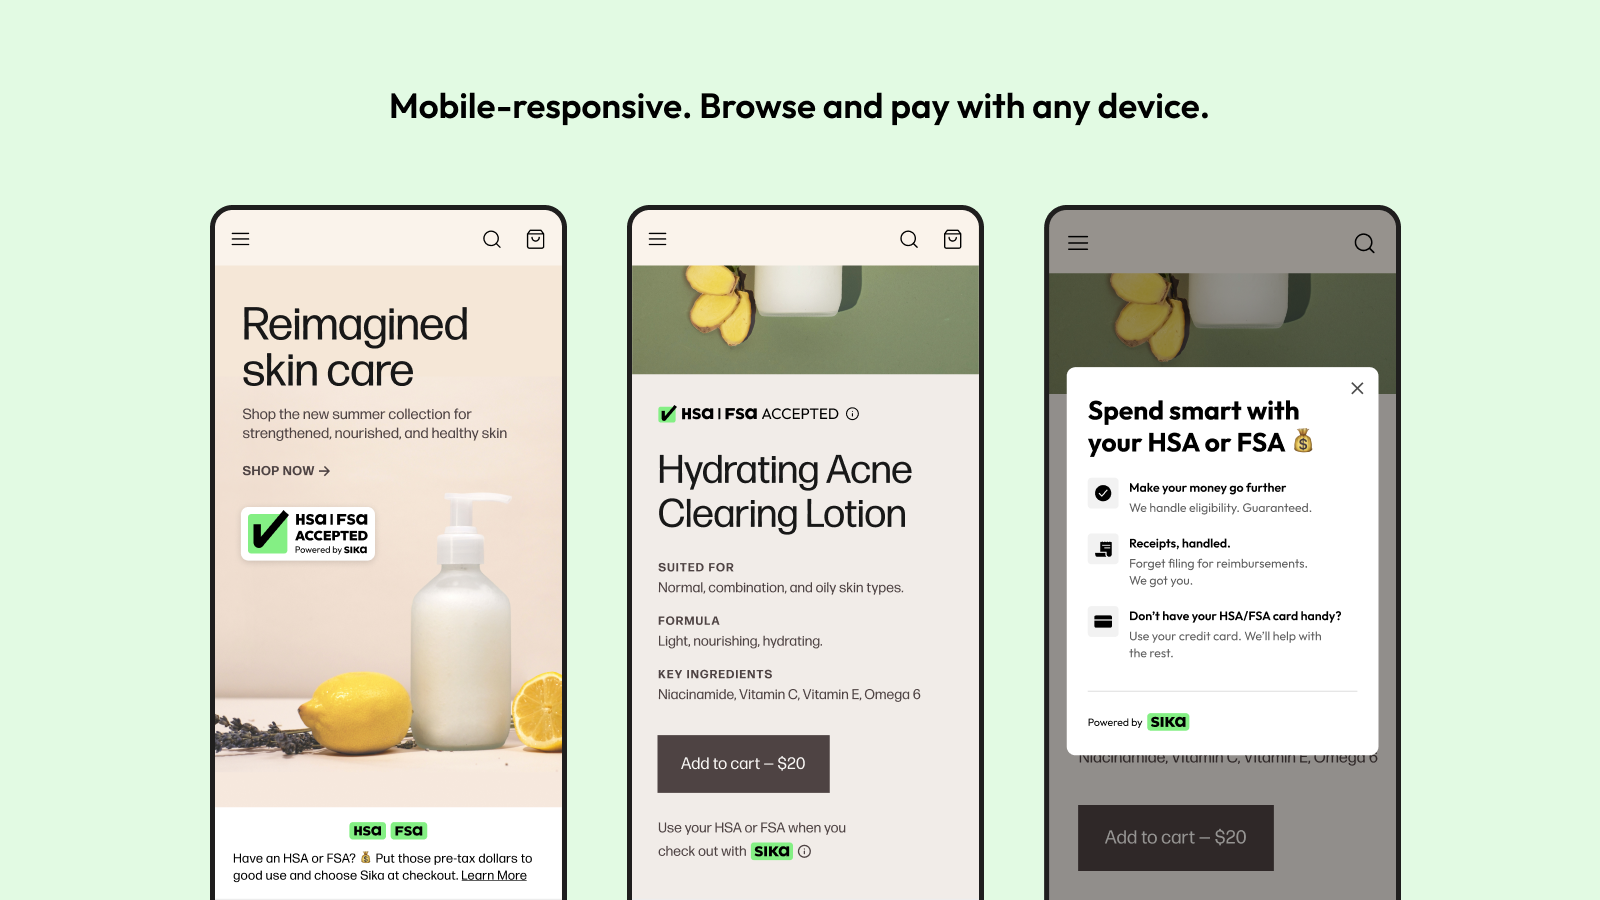 Mobile-responsive. Browse and pay with any device.